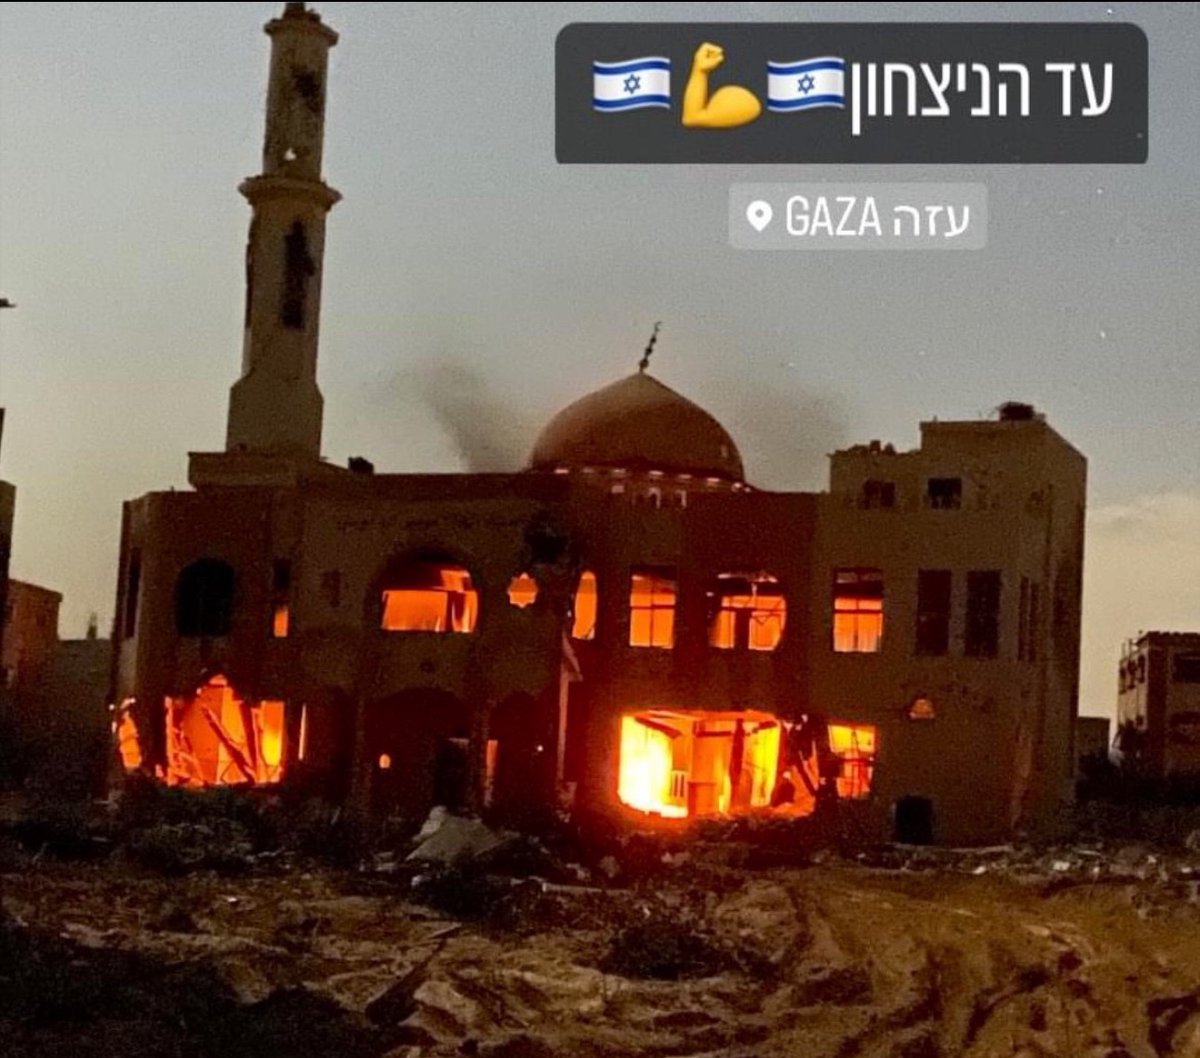 ISRAELIS BURN A MOSQUE AND POST IT ON SOCIAL MEDIA